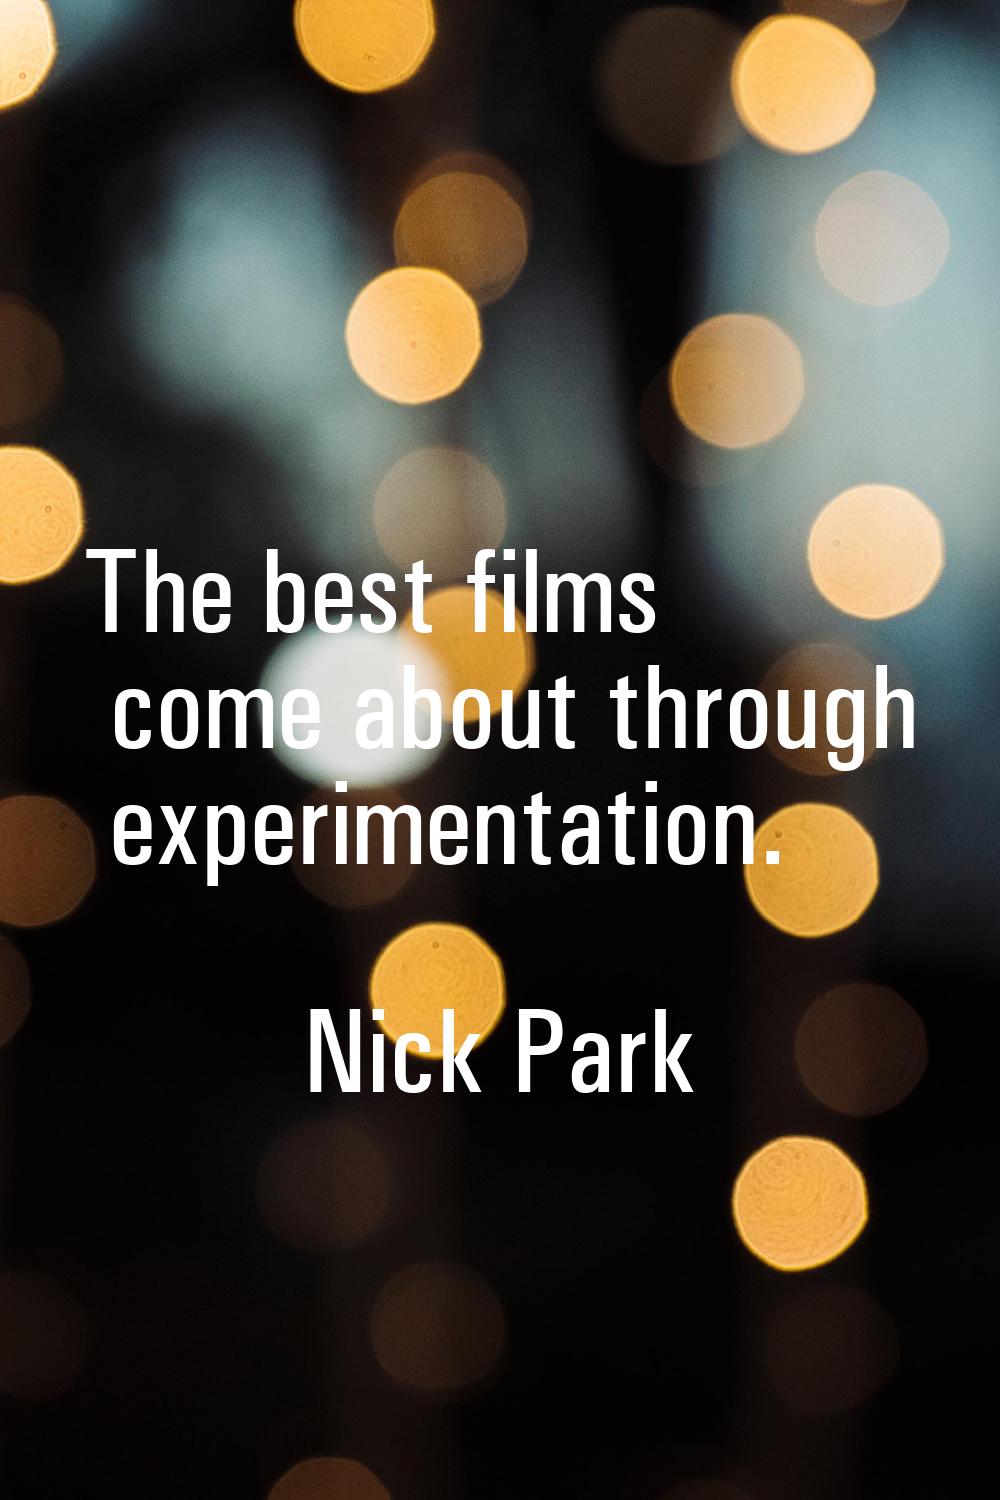 The best films come about through experimentation.